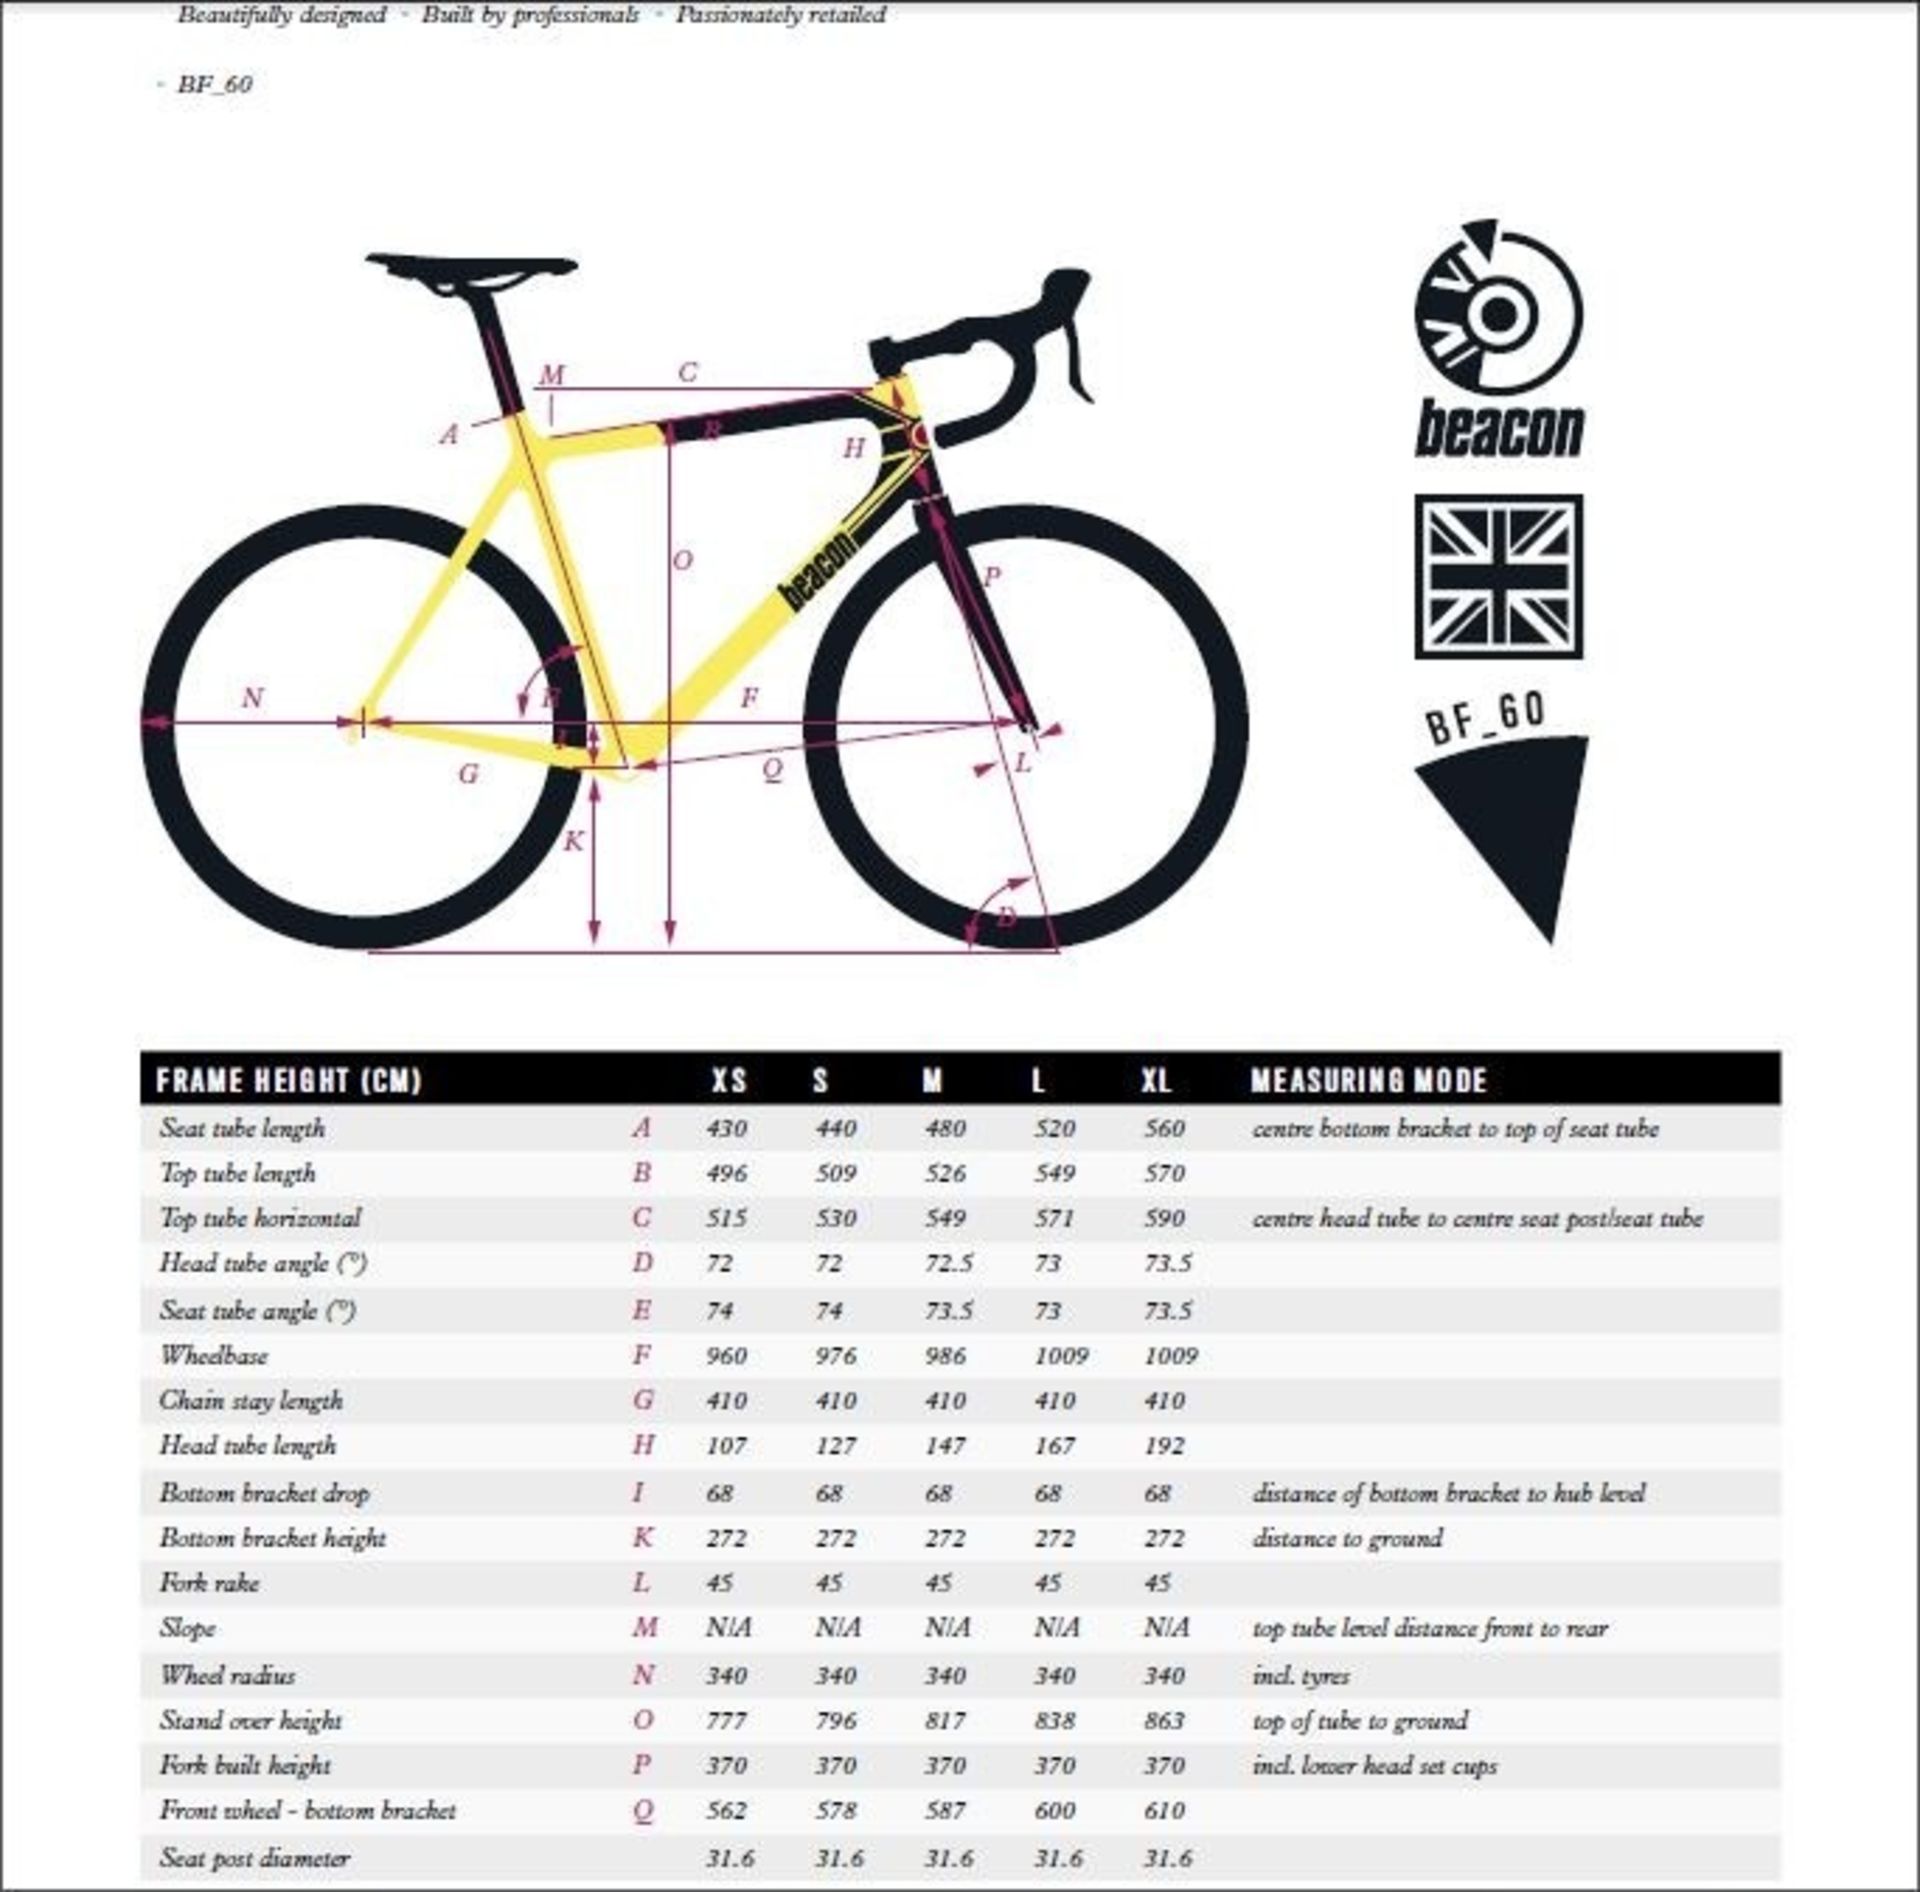 1 x Beacon Model BF-60, Size 520, Carbon Fibre Bike Frame in Yellow & Black. - Image 3 of 3